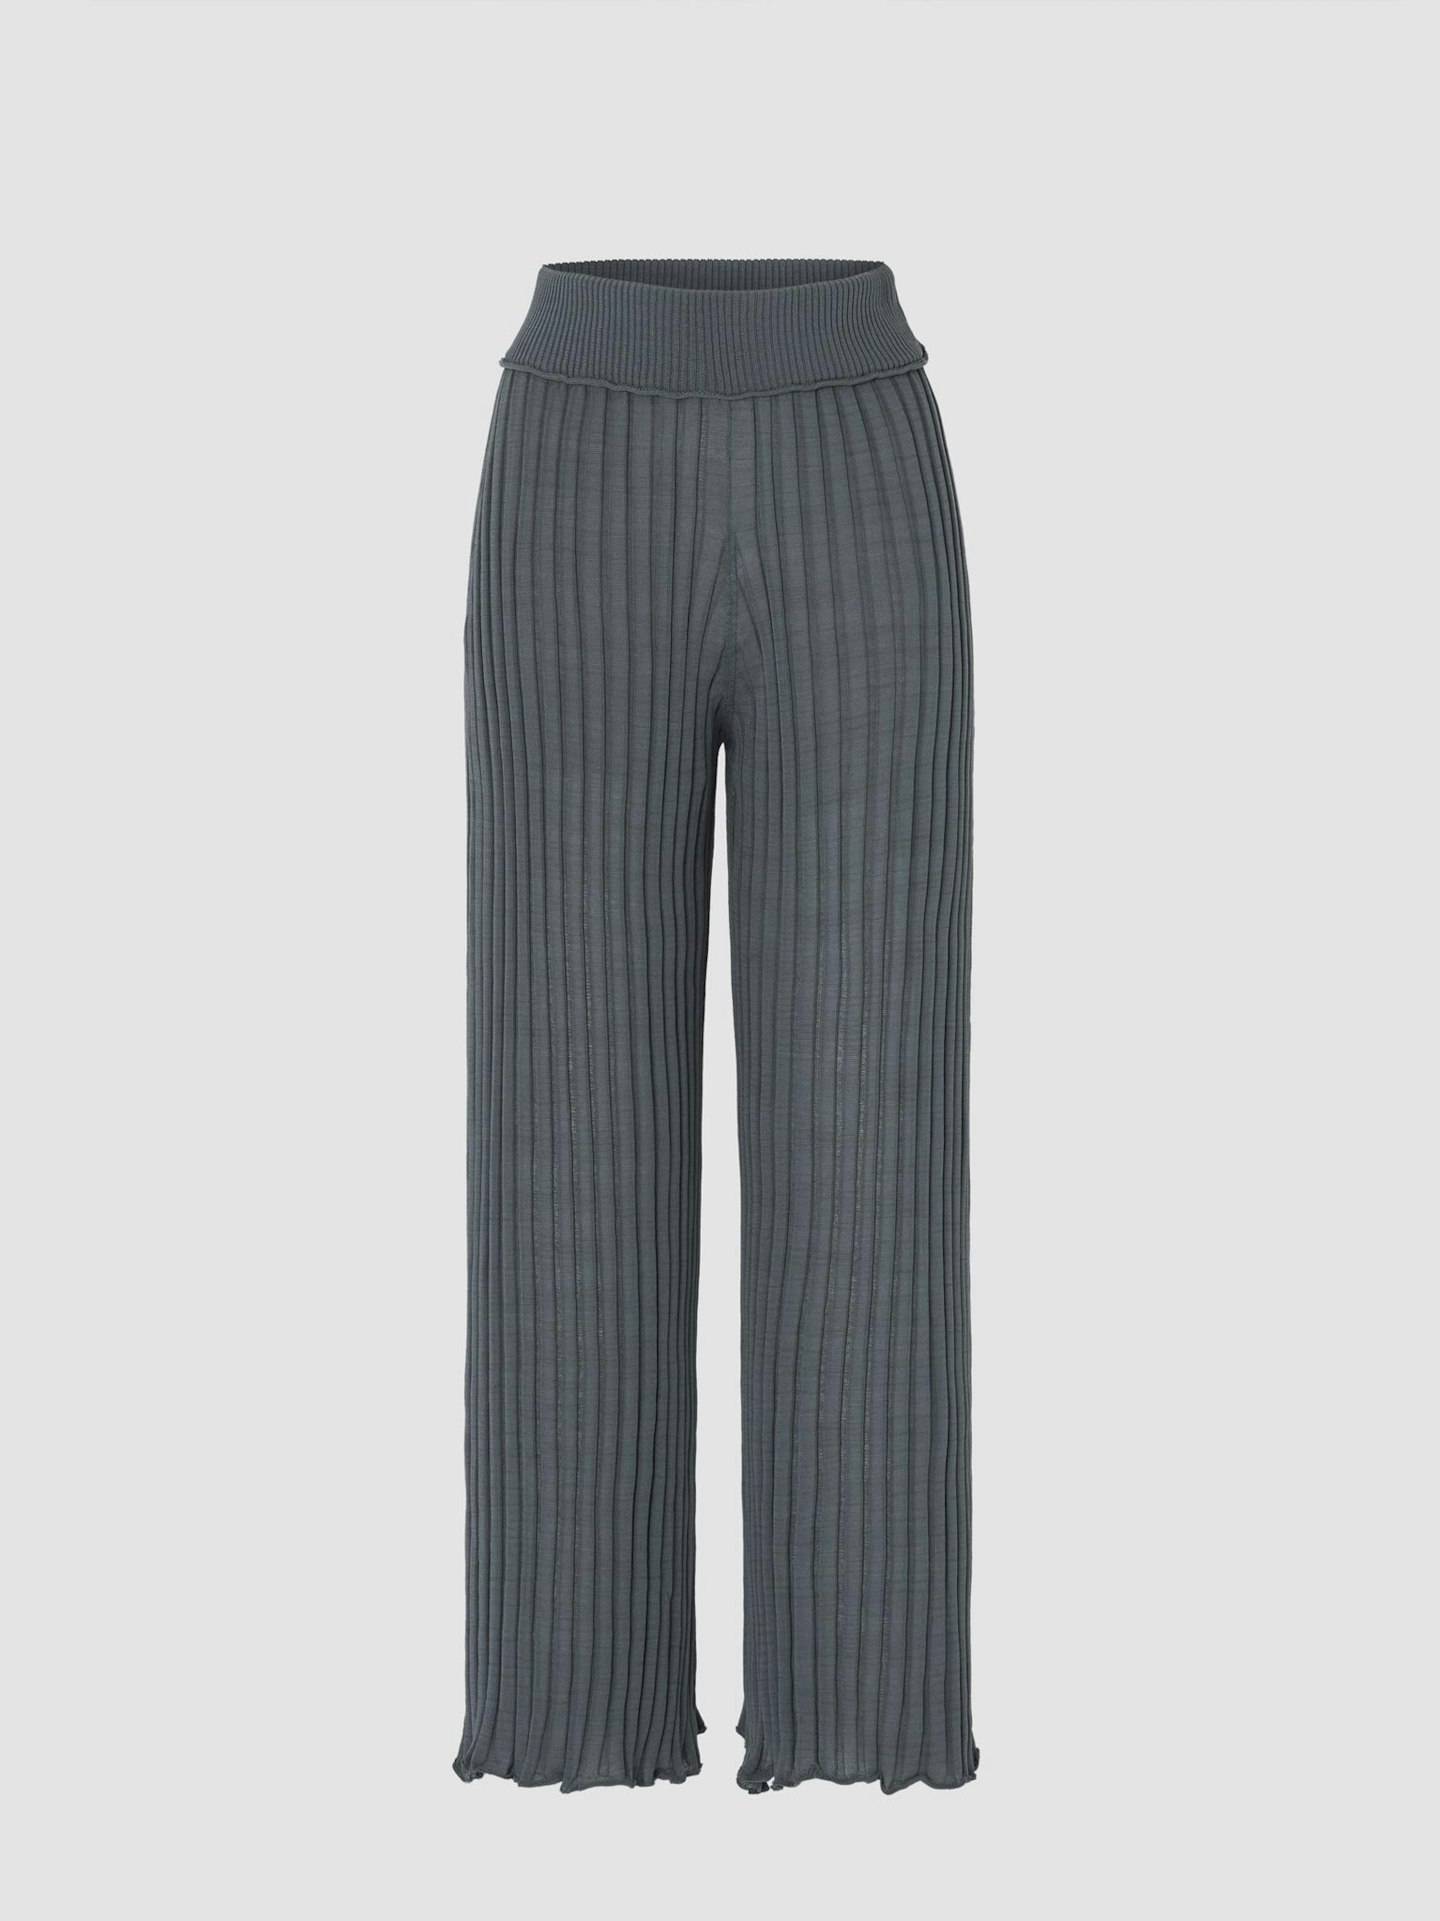 Rus The Brand, Ombre Straight-Cut Ribbed Pants, £246